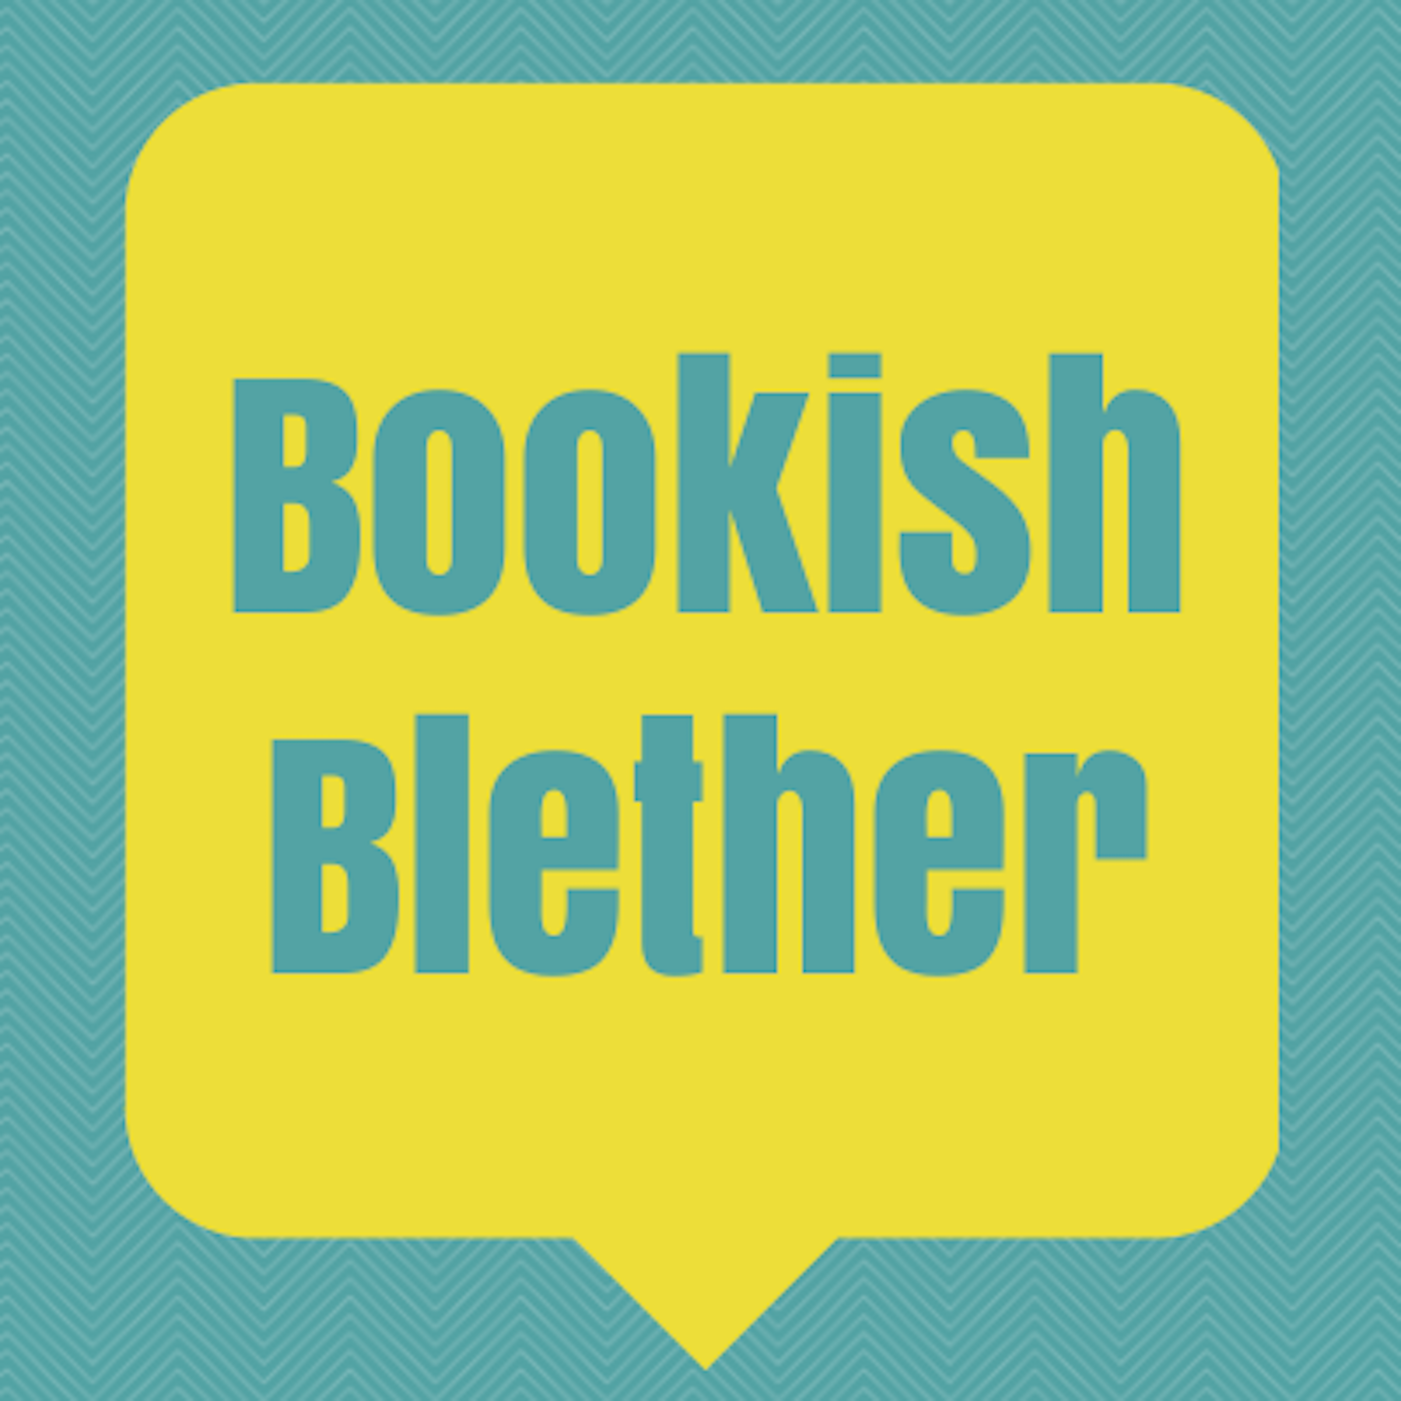 Bookish Blether